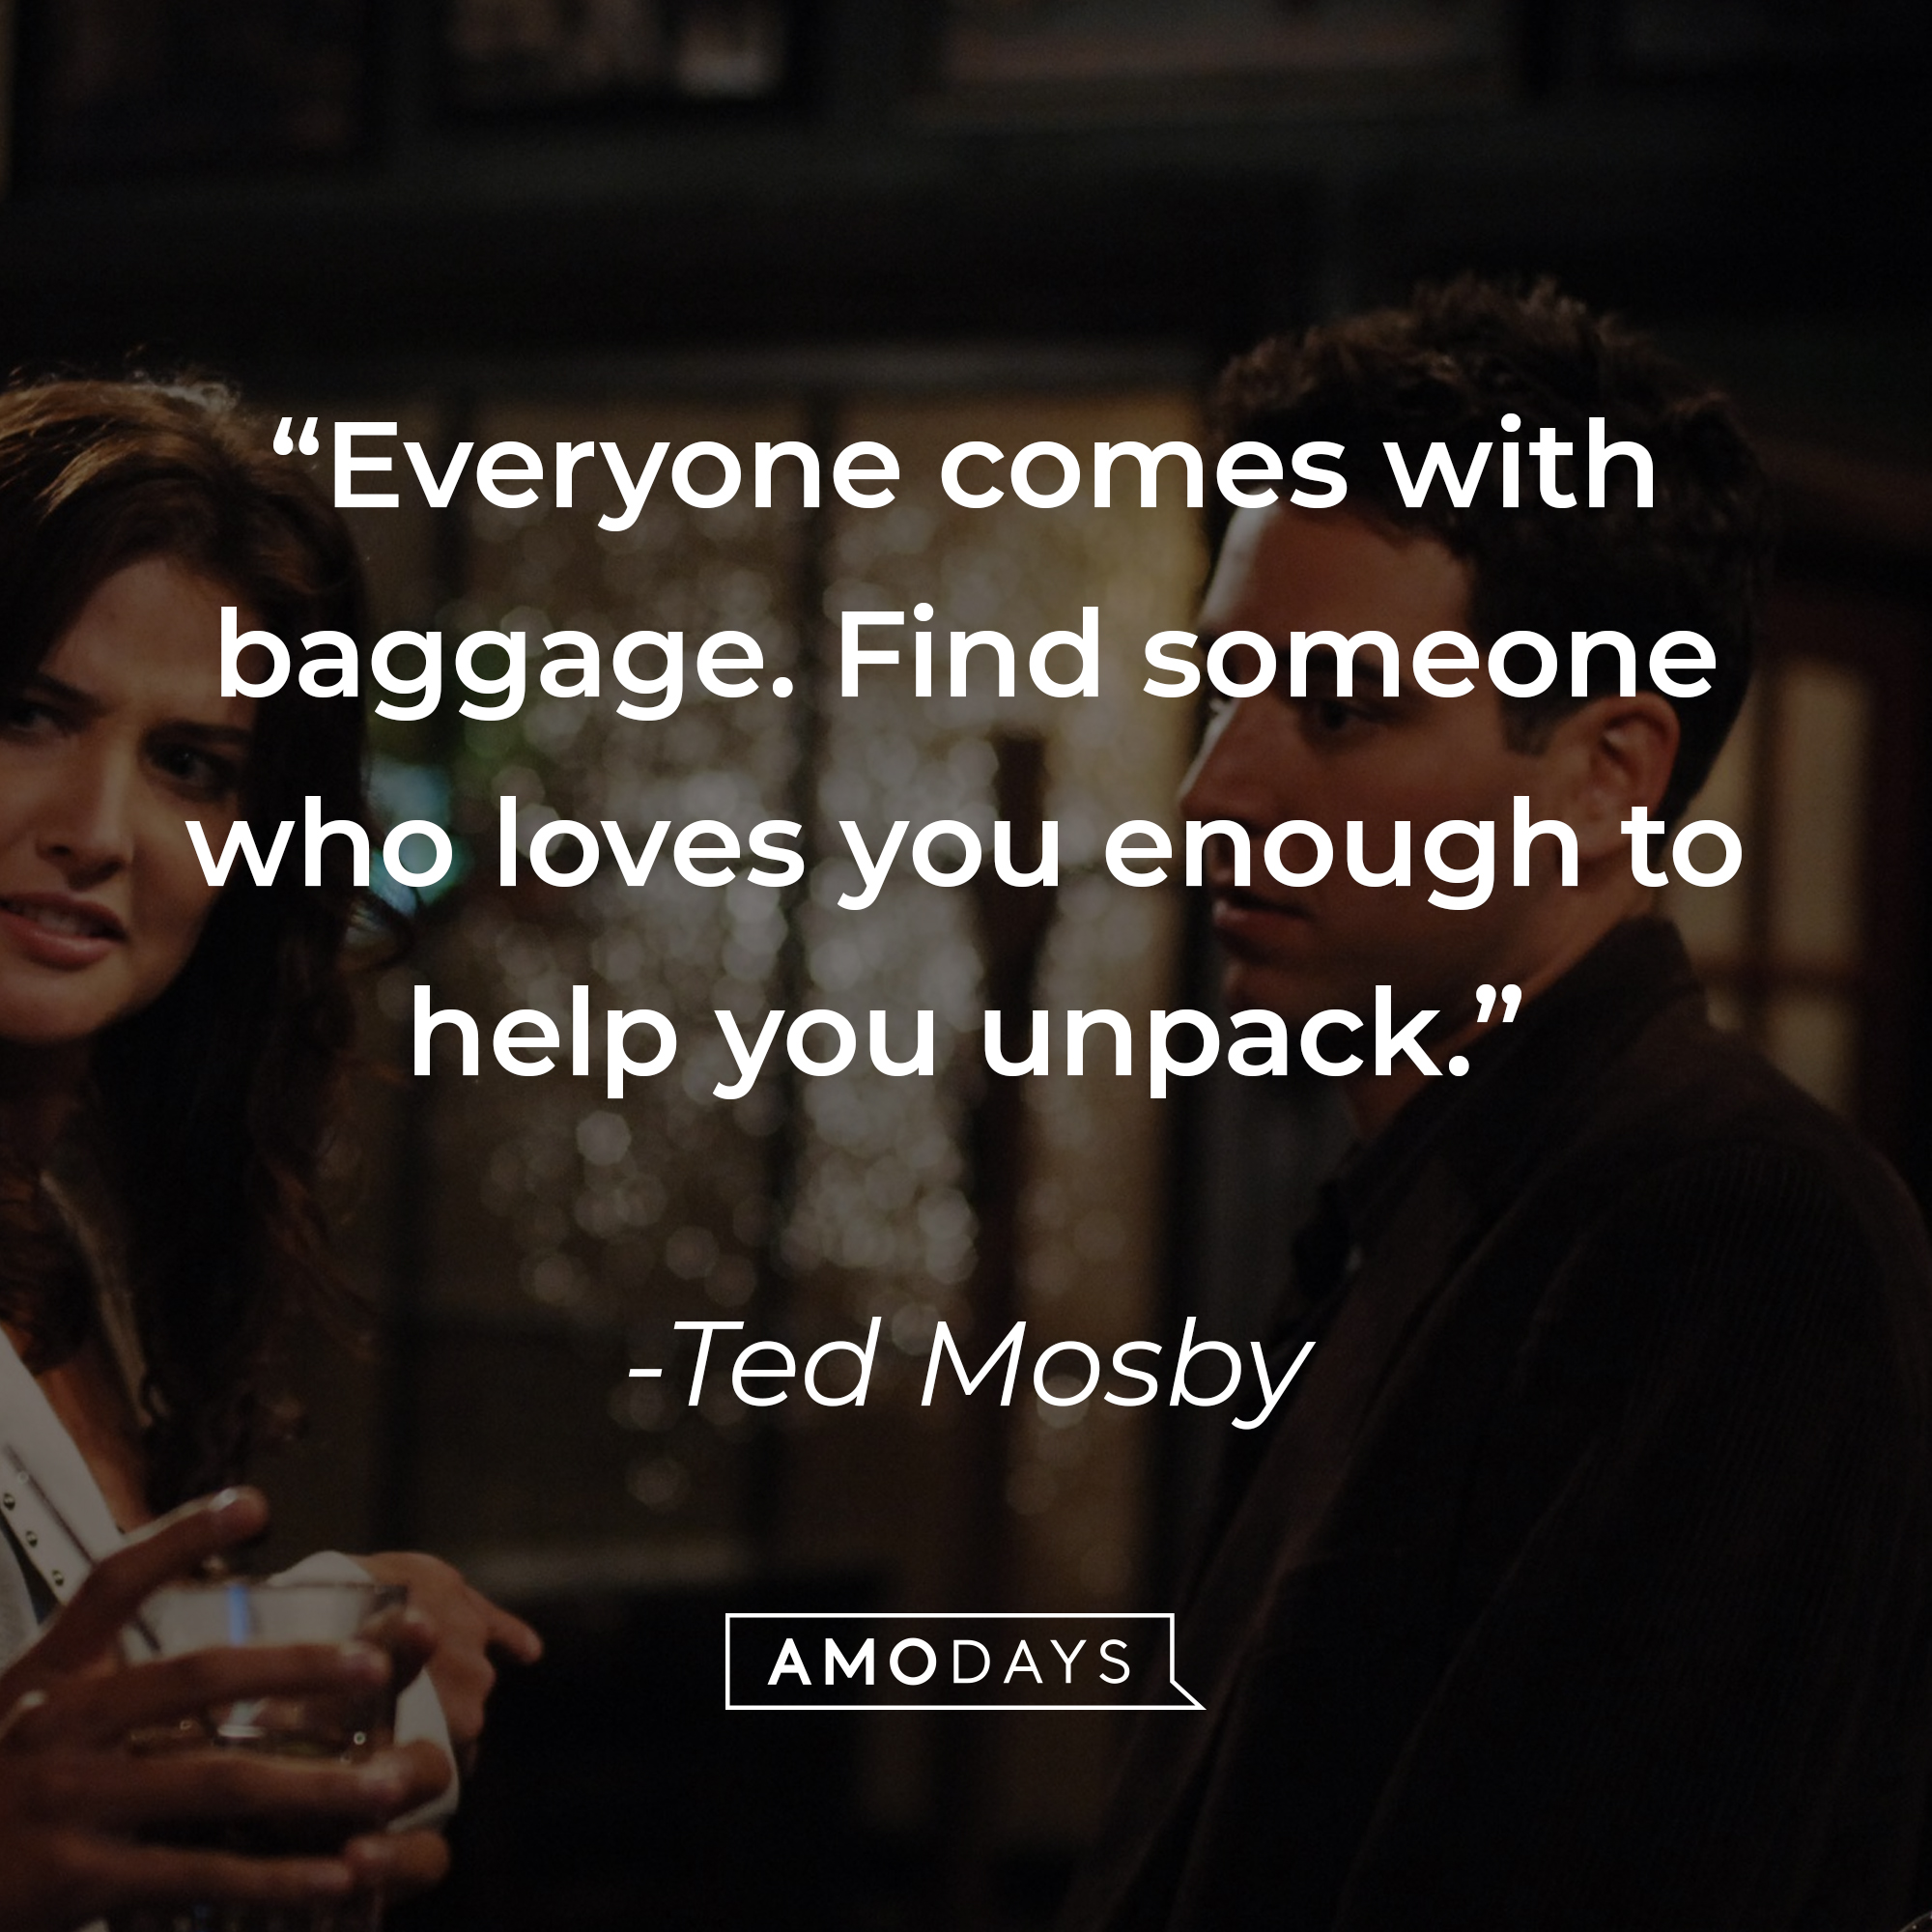 Ted Mosby's quote: “Everyone comes with baggage. Find someone who loves you enough to help you unpack." | Source: facebook.com/OfficialHowIMetYourMother